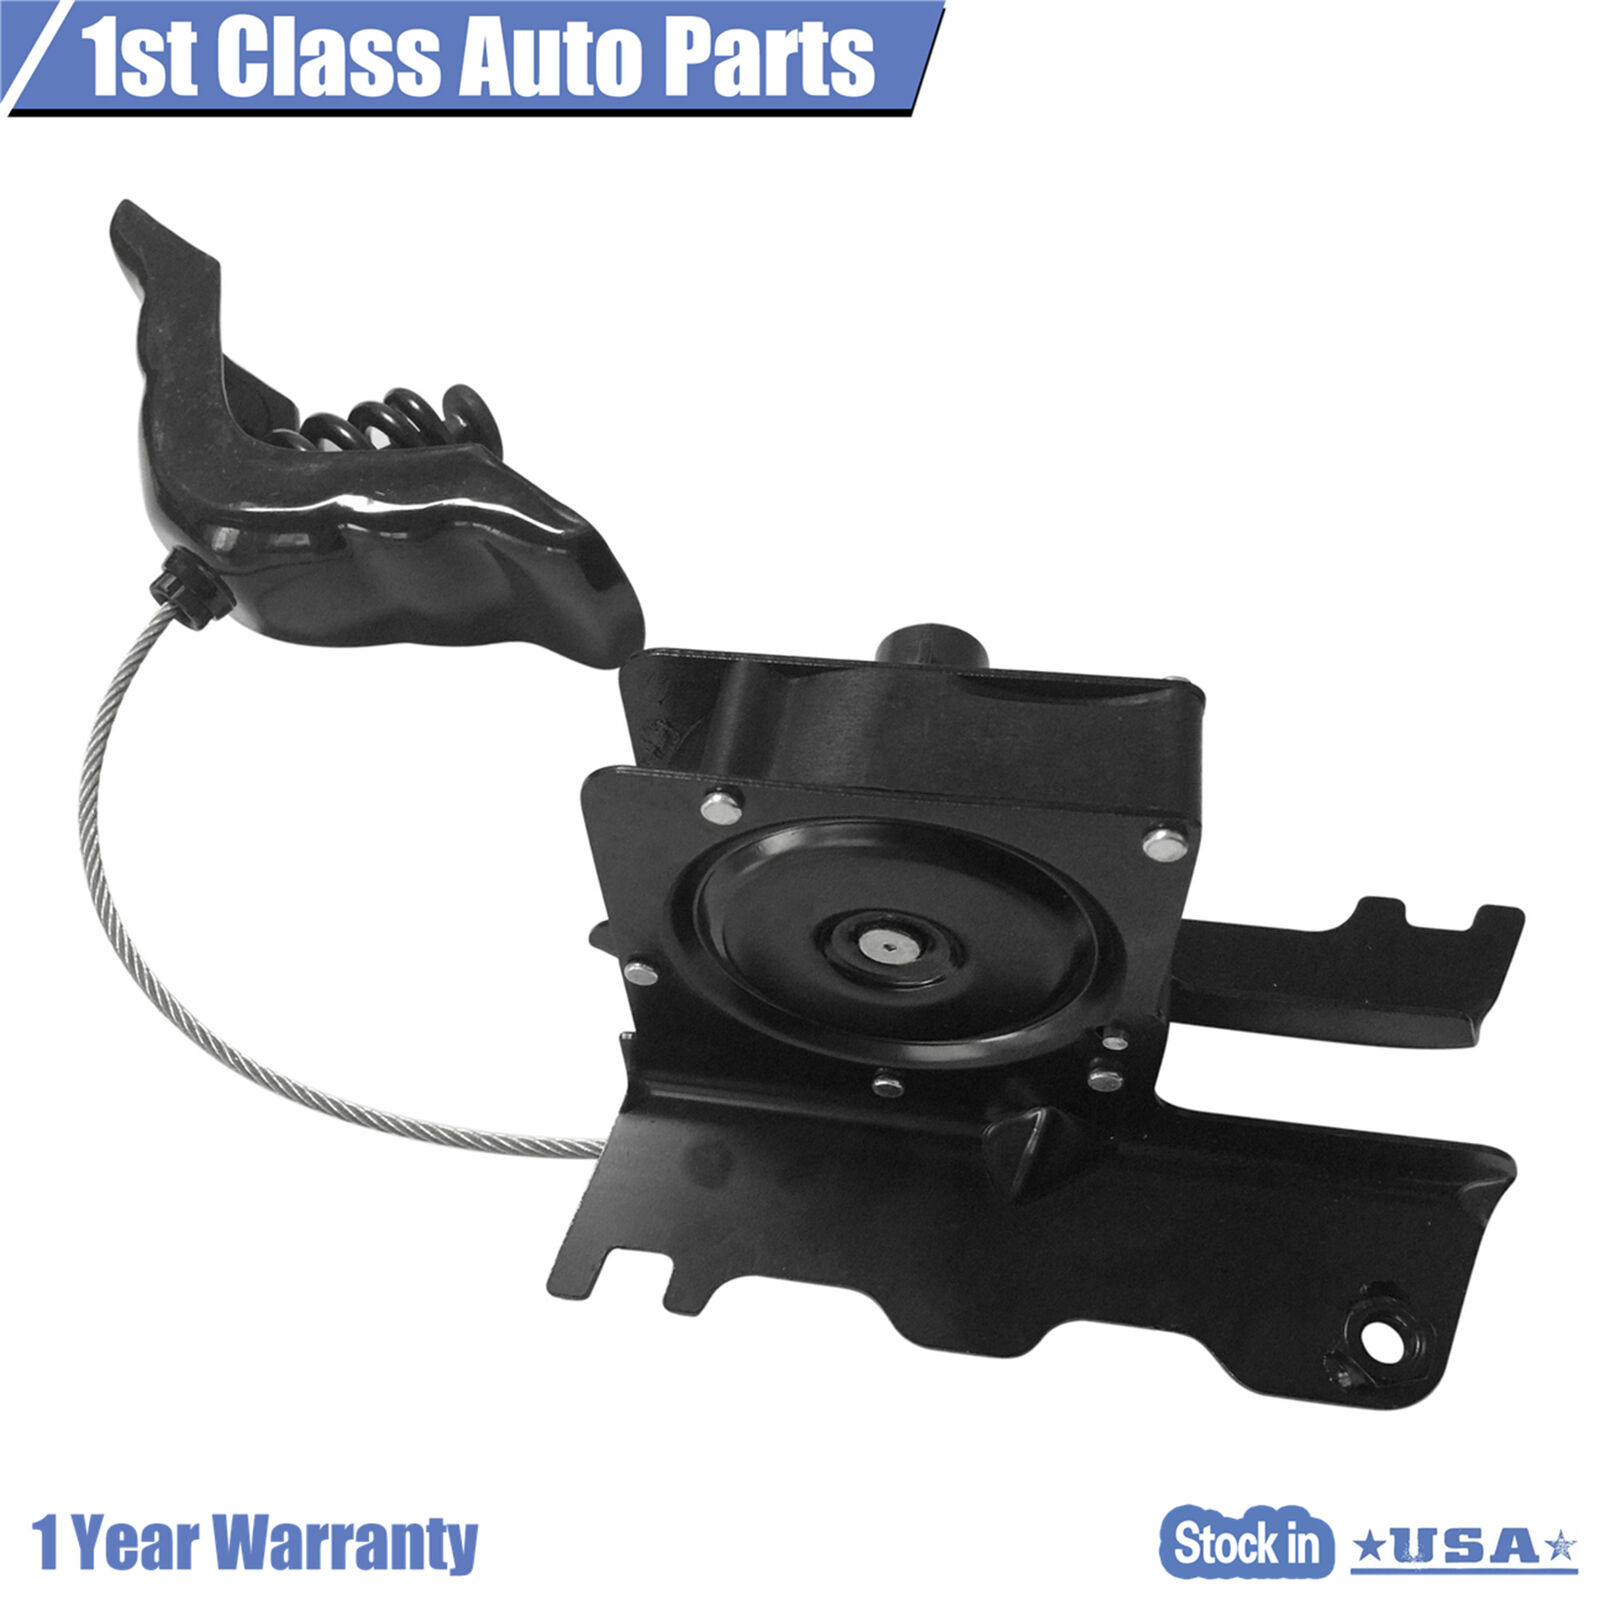 Spare Tire Carrier & Hoist Assembly 924-539 Fits 08-16 Ford F250 F350 Super Duty